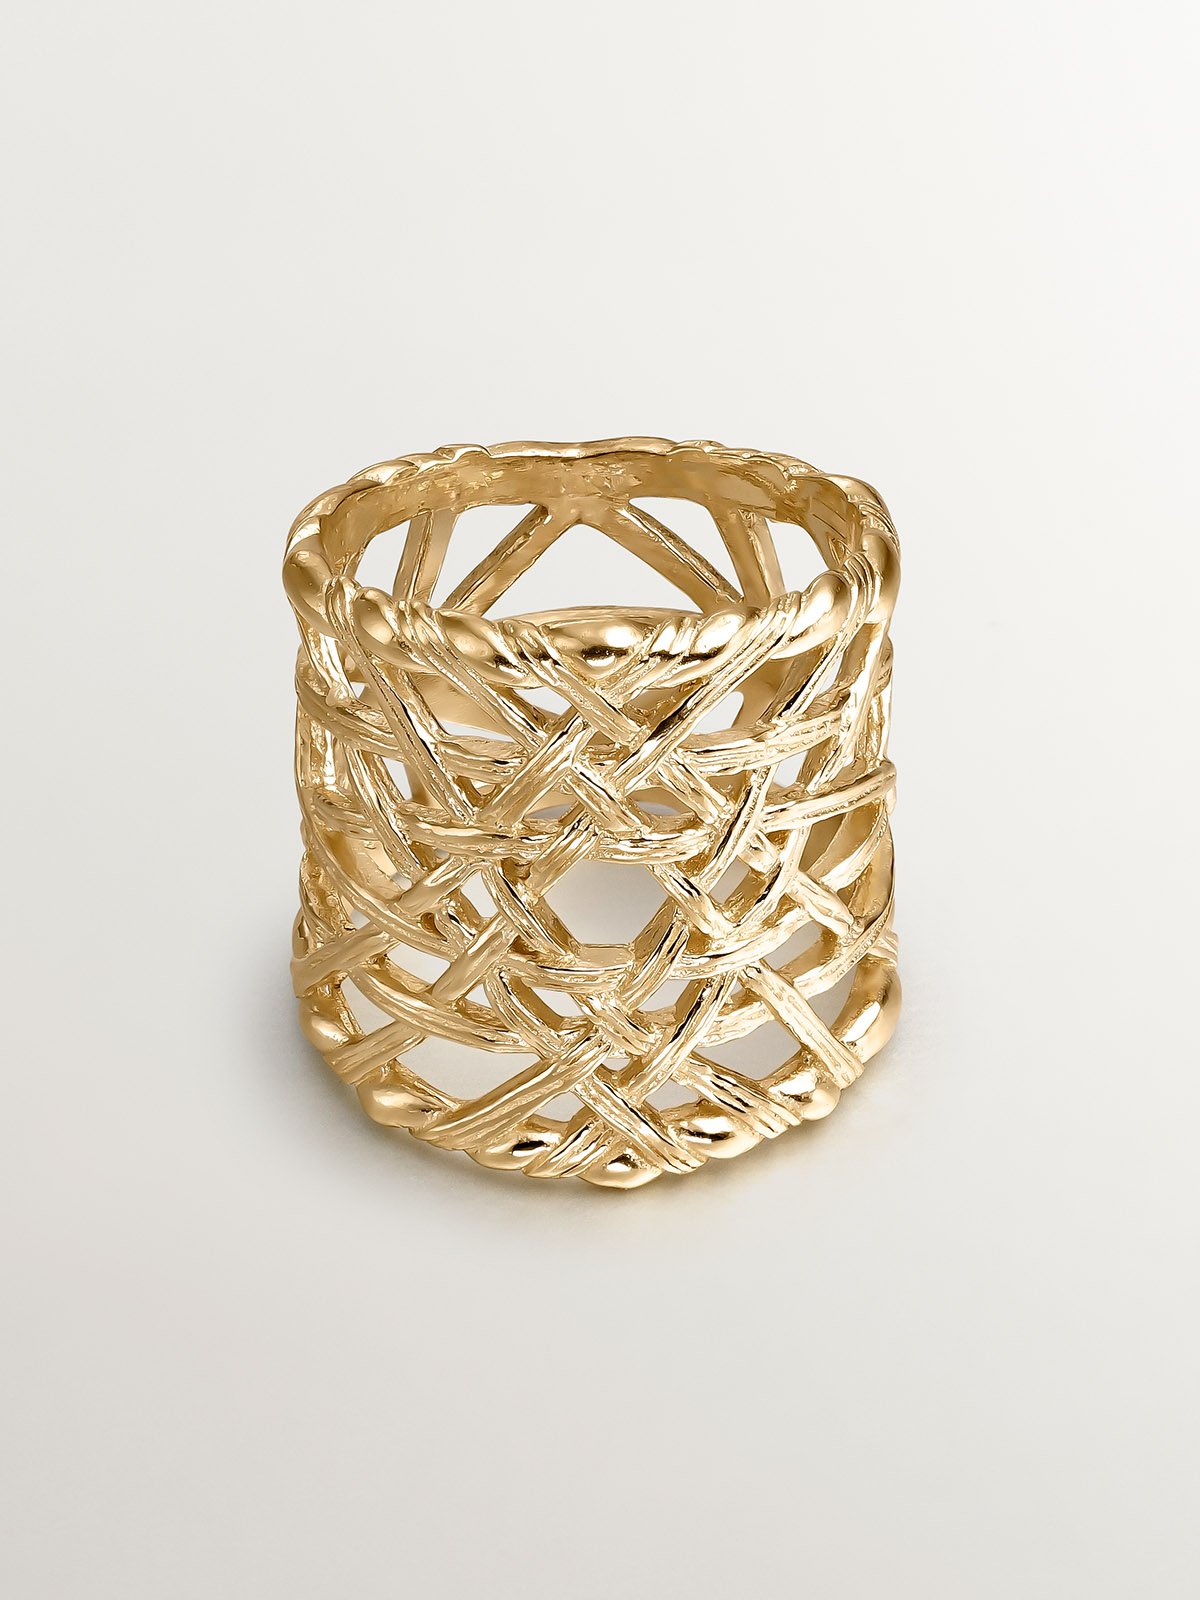 Wide 925 silver ring bathed in 18K yellow gold with wicker texture